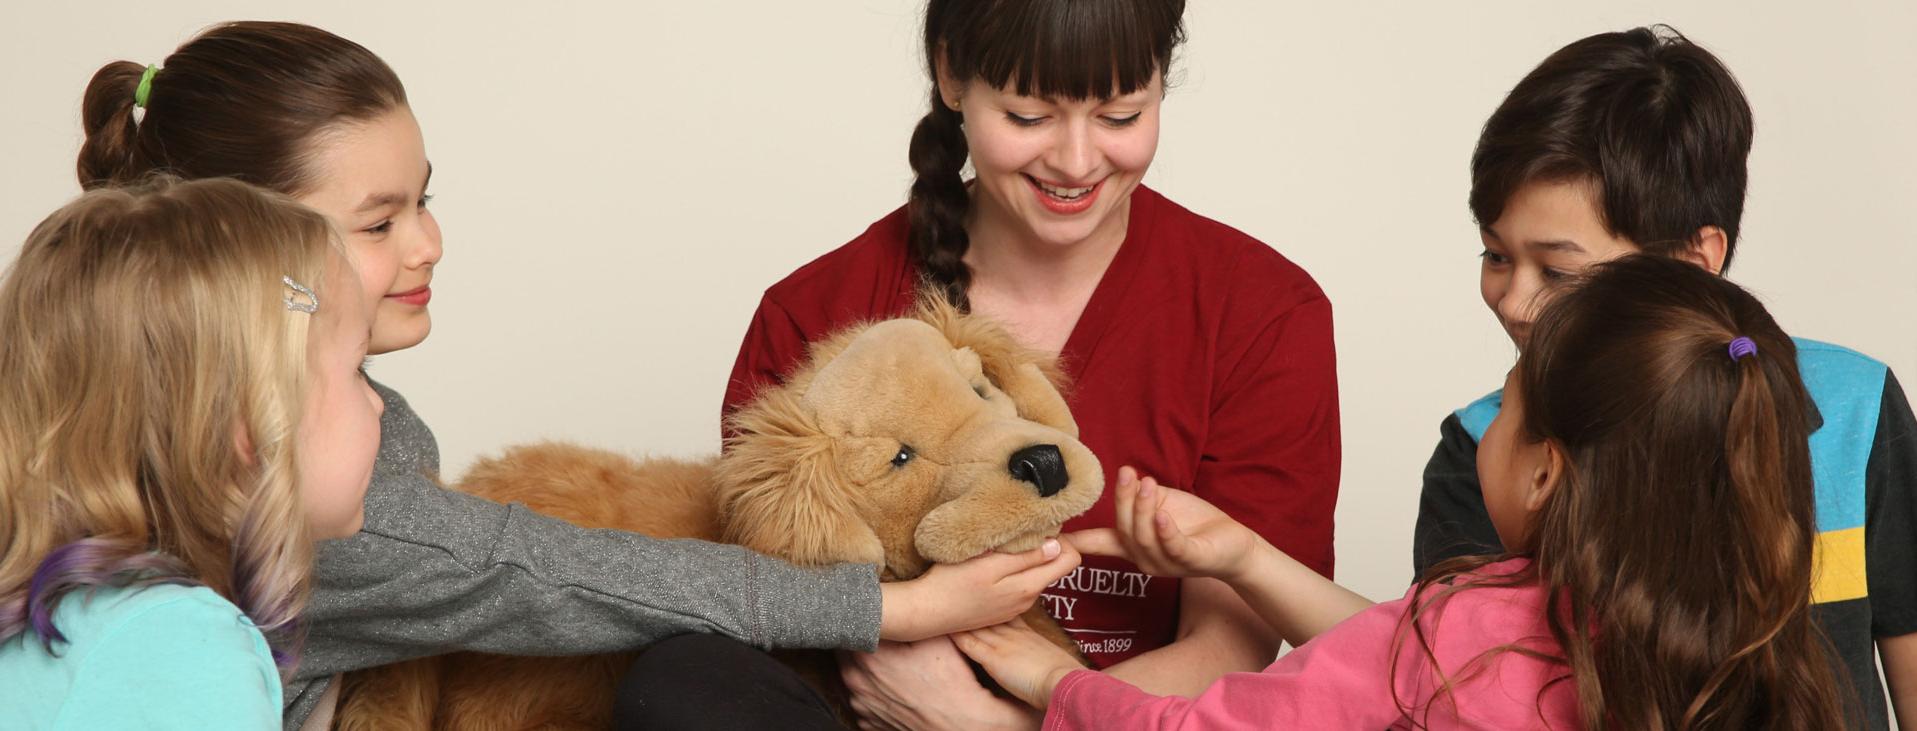 woman with brown hair in a braid holds dog puppet while four children pet dog puppet